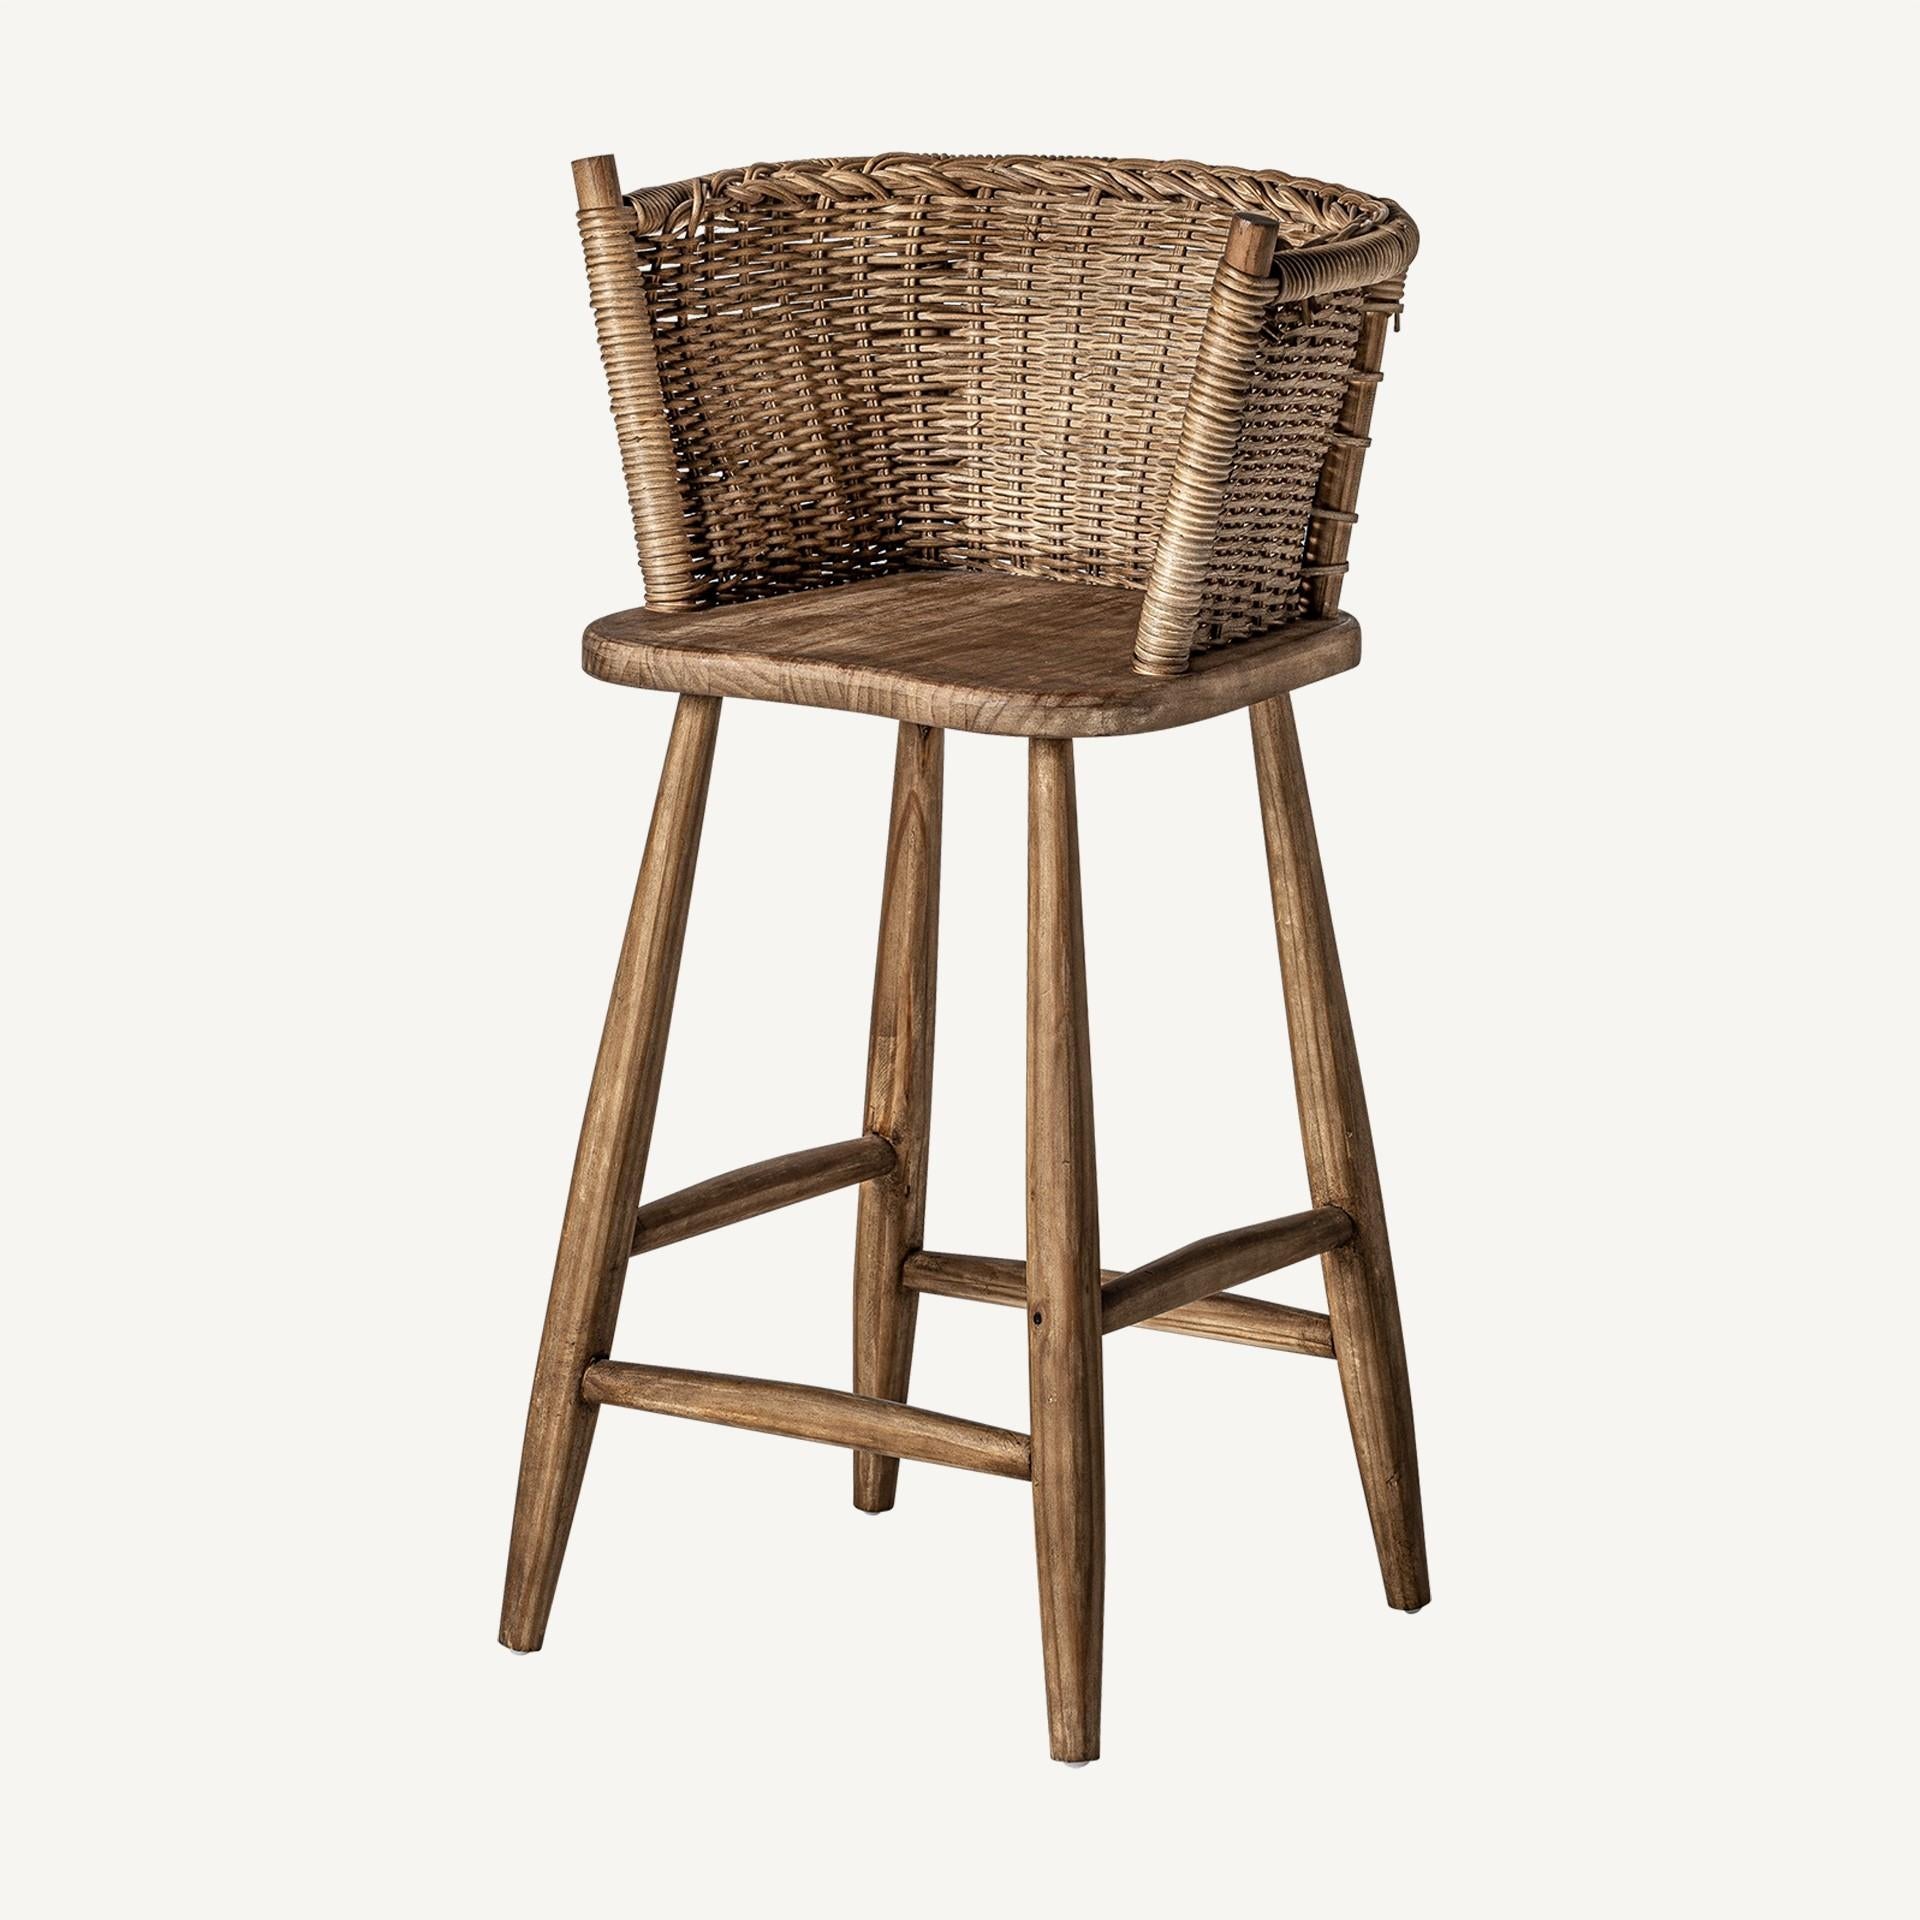 Contemporary Handcrafted Braided Wicker and Wooden Bar Stool For Sale